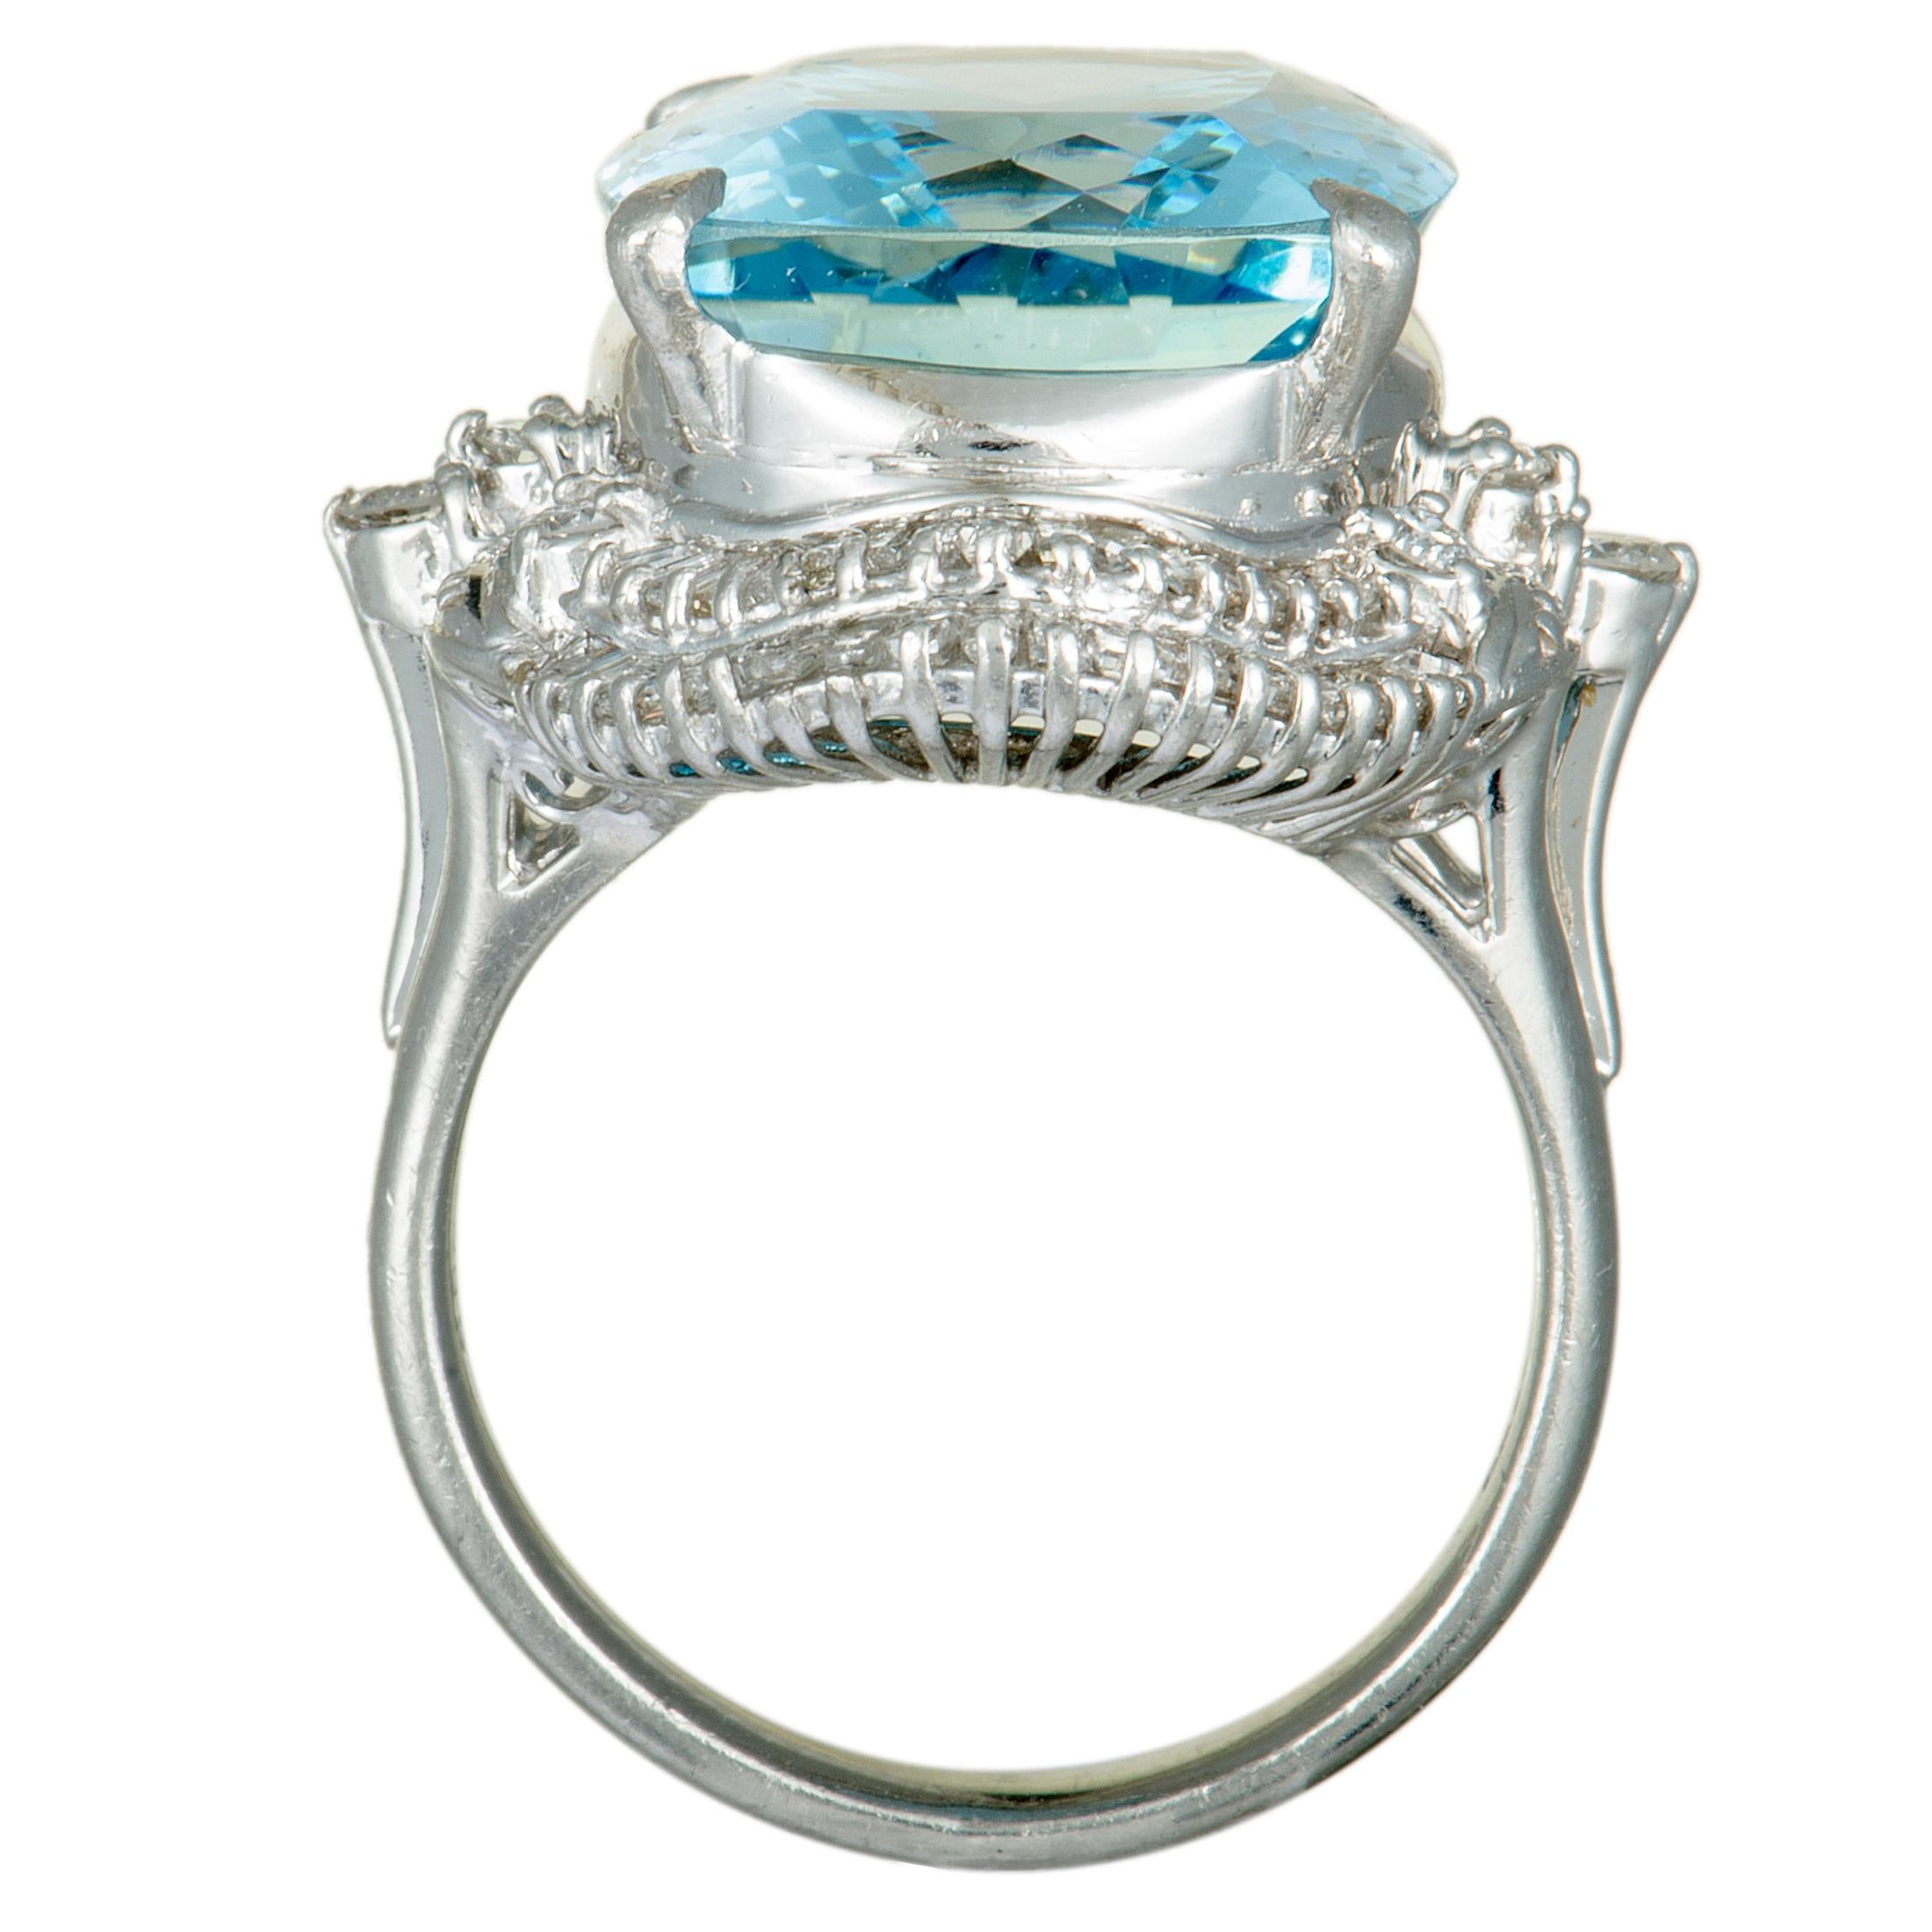 Elevate your style in an endearingly luxurious fashion with this gorgeous platinum ring that boasts a splendidly classy design topped off with sublime gems. The ring is set with a total of 0.86 carats of diamonds and with an expertly cut aquamarine